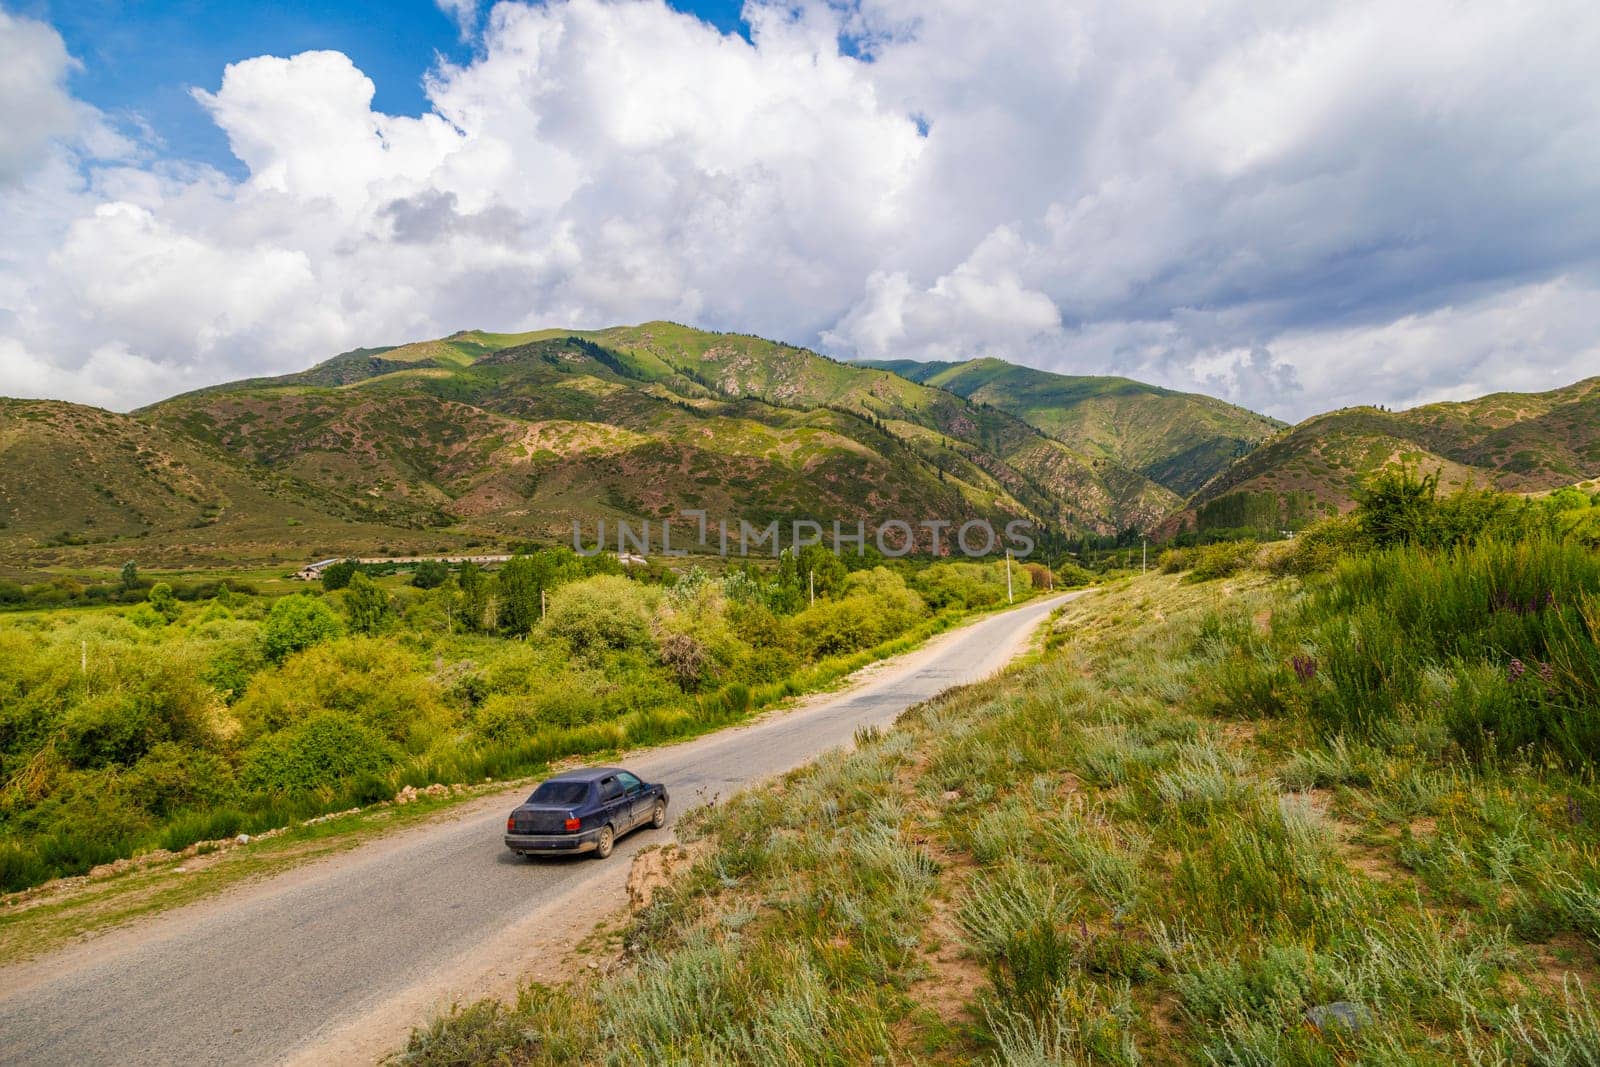 Car driving on country road with mountains, grass, and clouds in the background by z1b